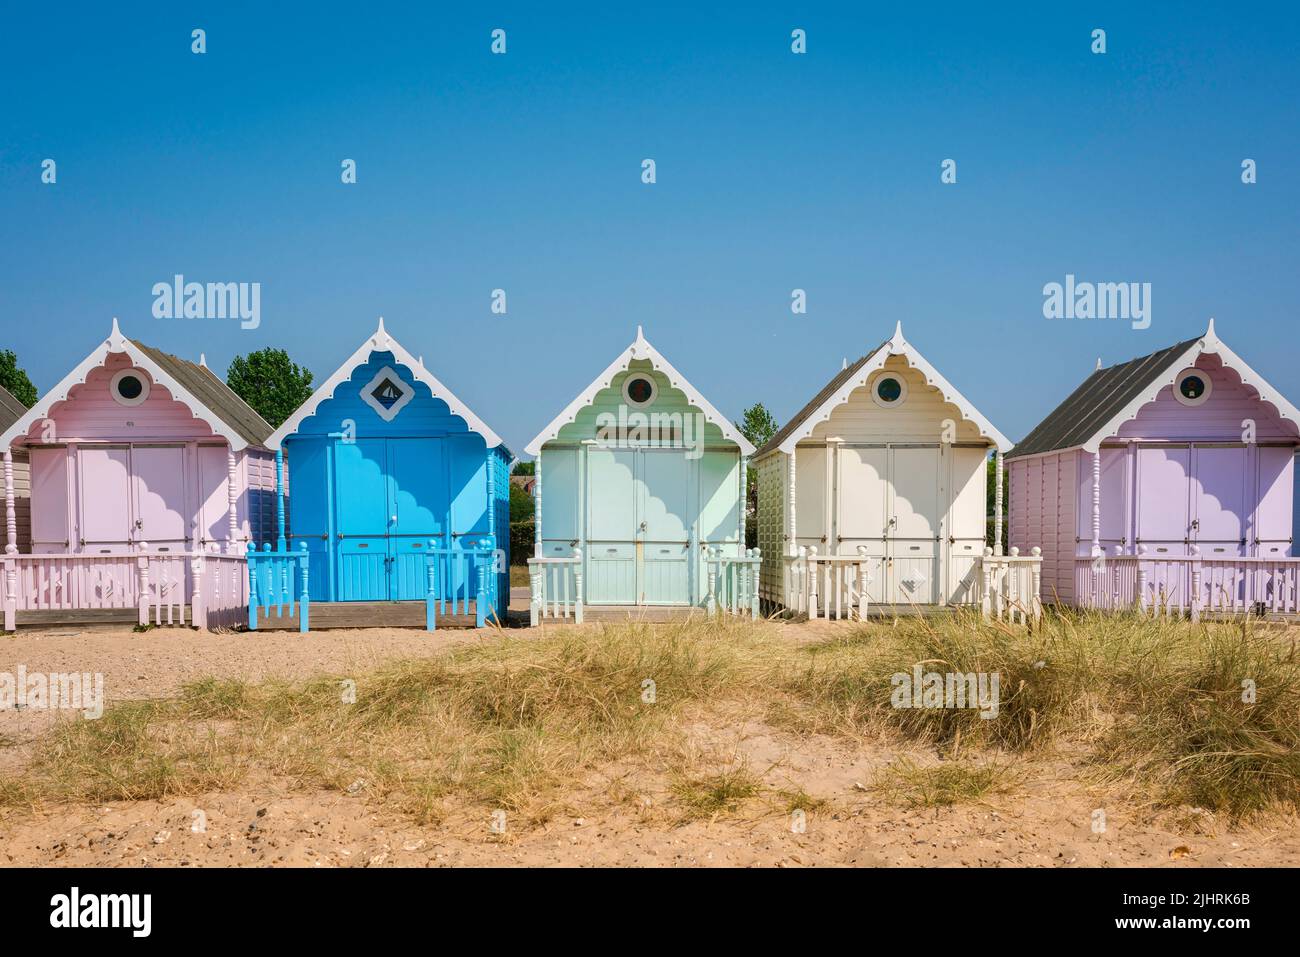 UK traditional summer holiday, view in summer of a colorful beach hut under a clear blue sky, West Mersea, Essex, England, UK Stock Photo